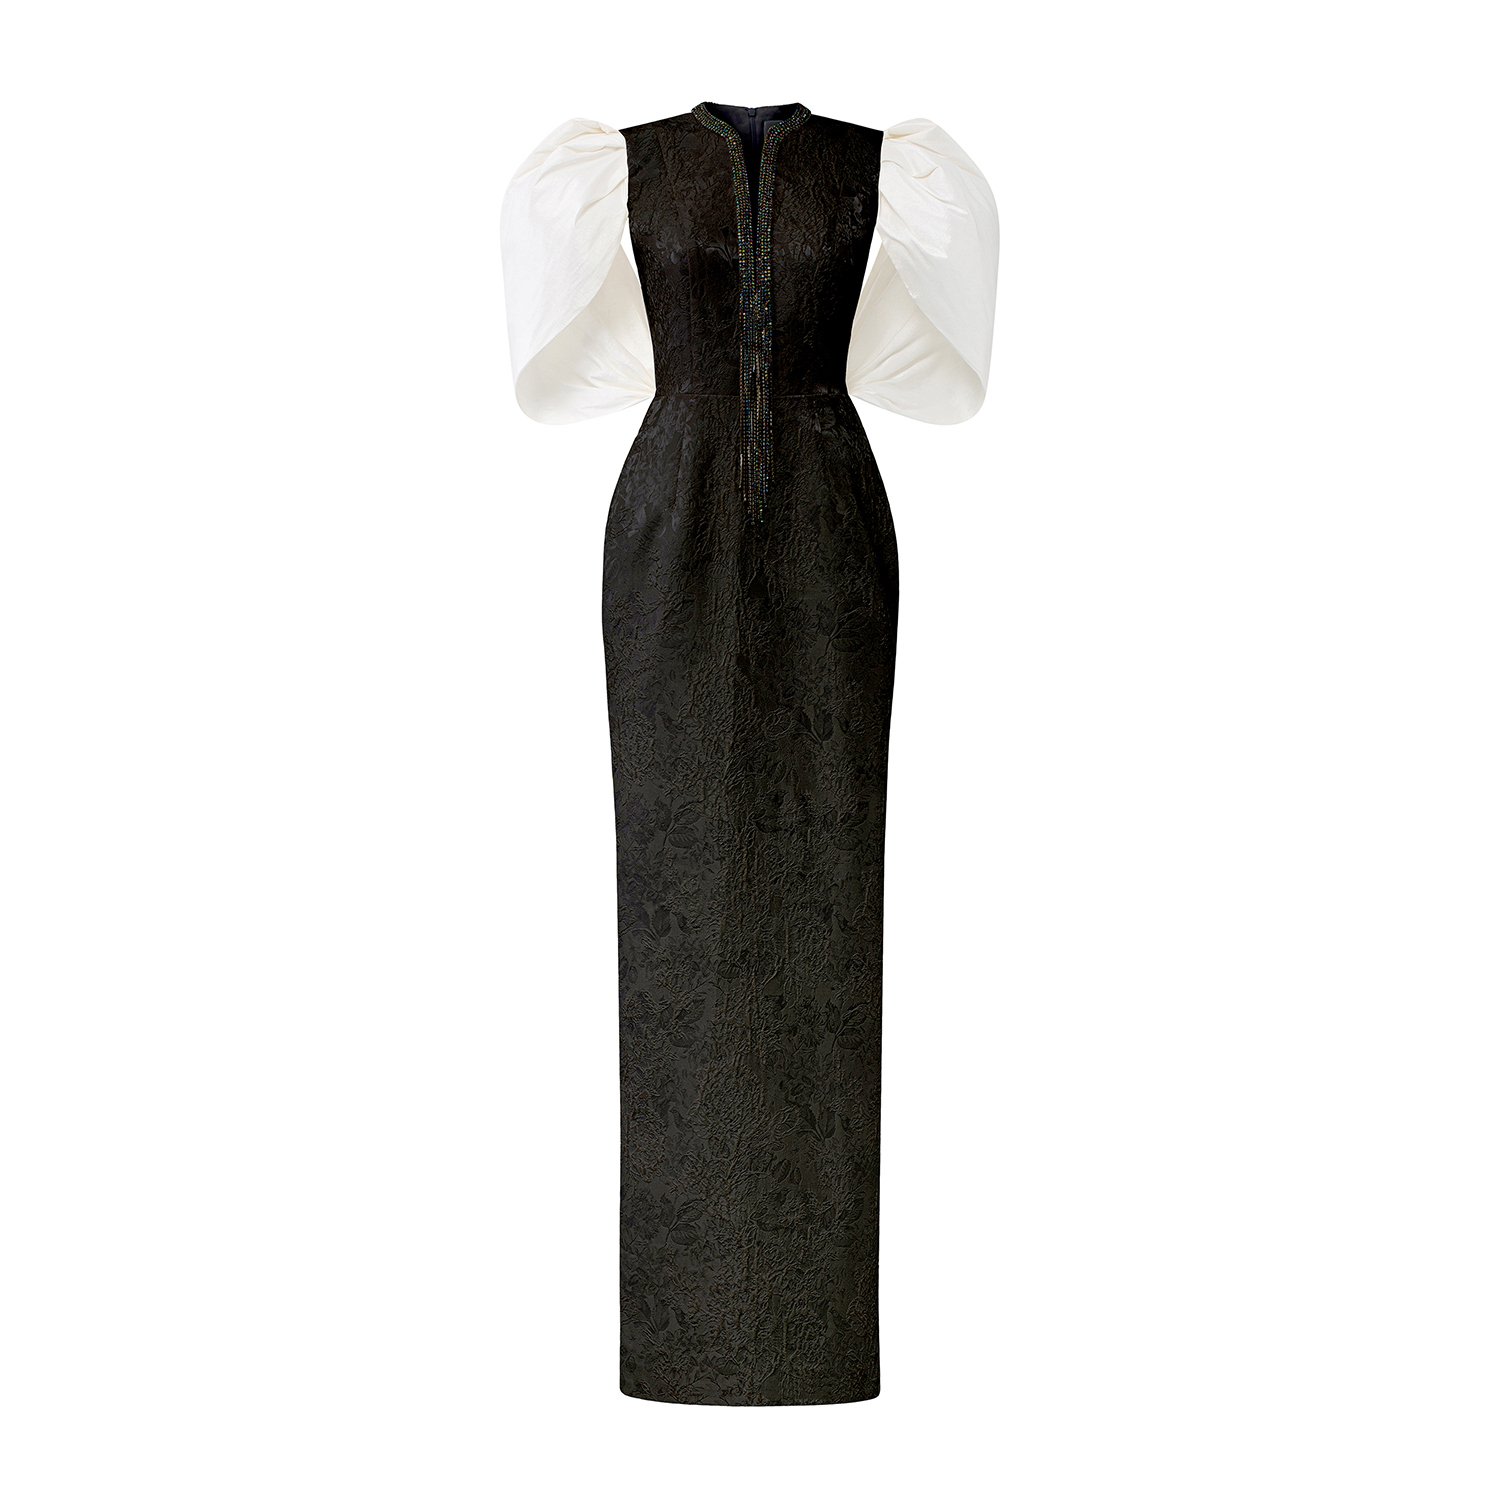 Women’s Black / White Black White V-Cut Neck Gown With Exaggerated Taffeta Sleeves Small I. h.f Atelier